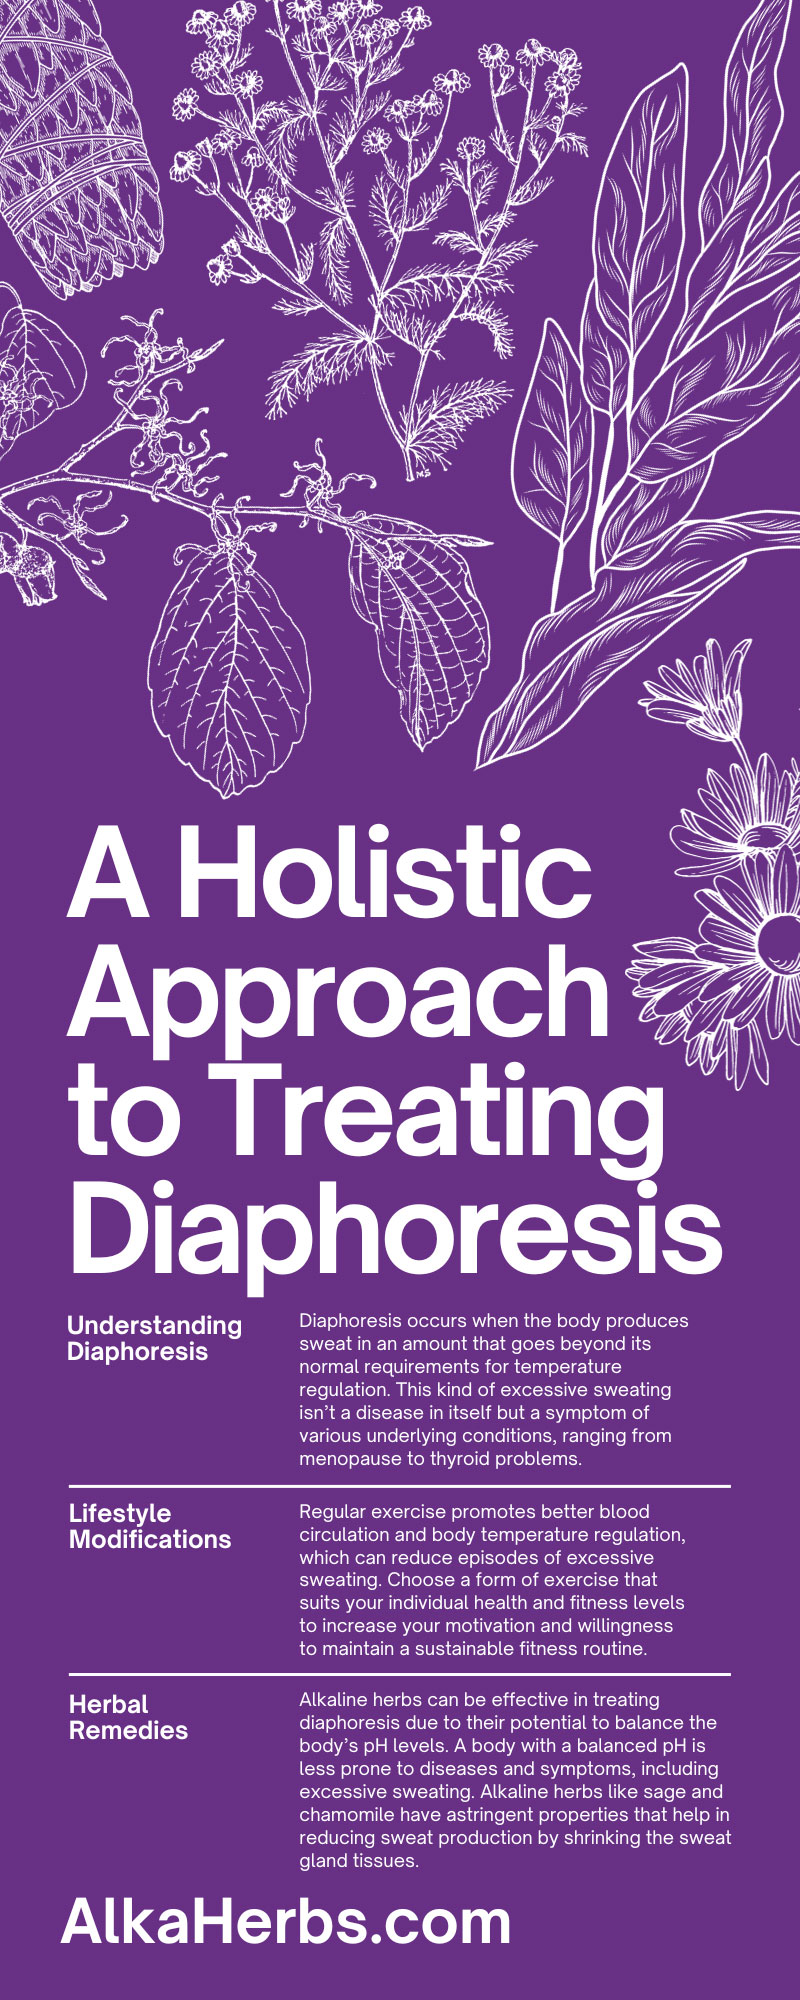 A Holistic Approach to Treating Diaphoresis